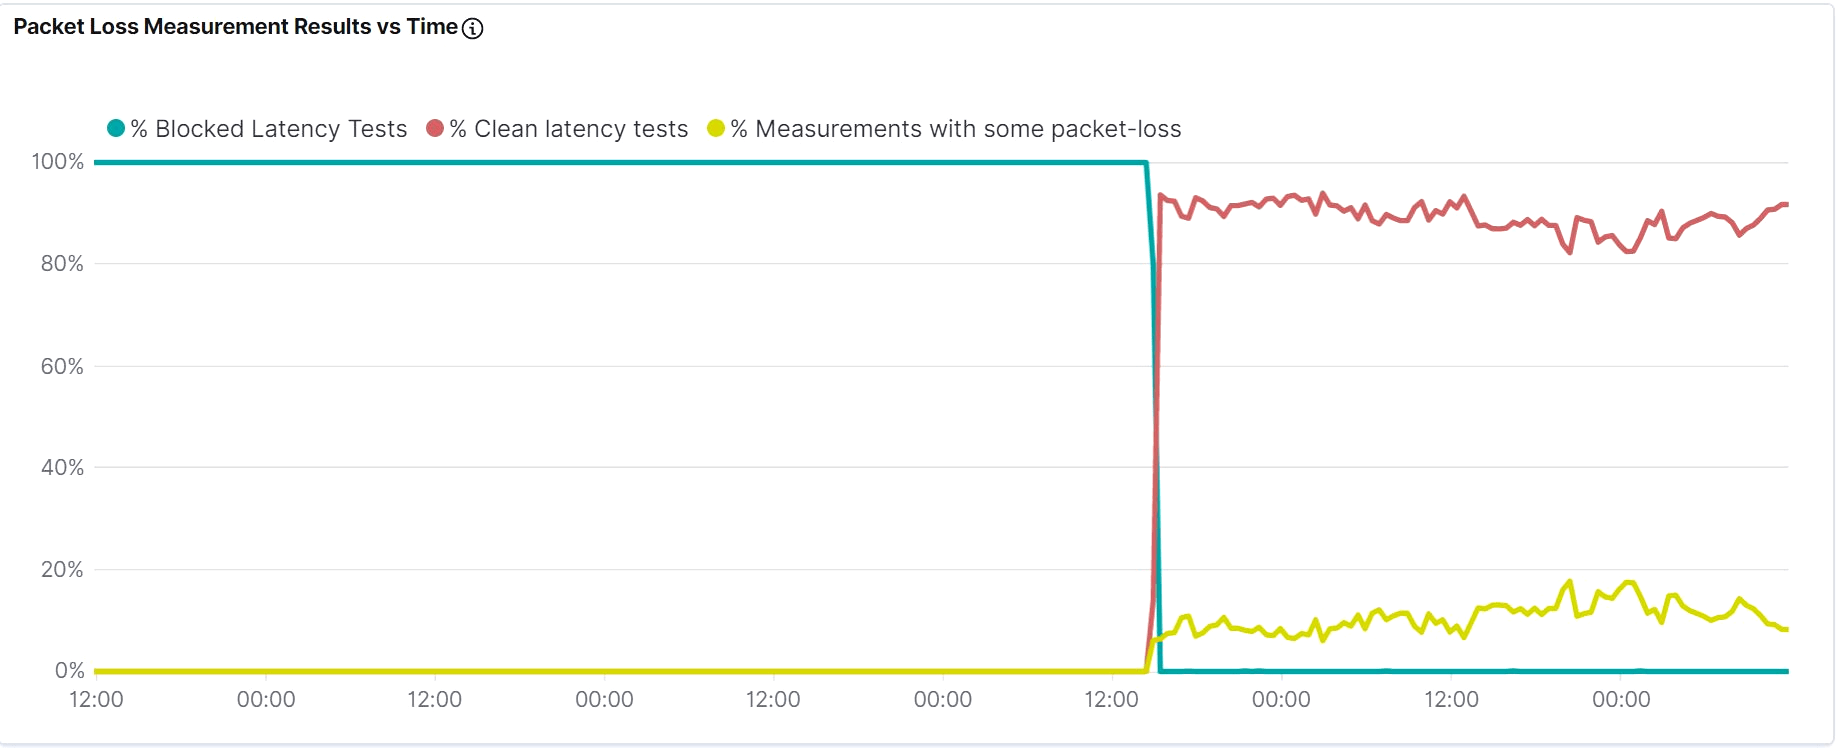 Packet Loss Measurement Results vs Time, after fix